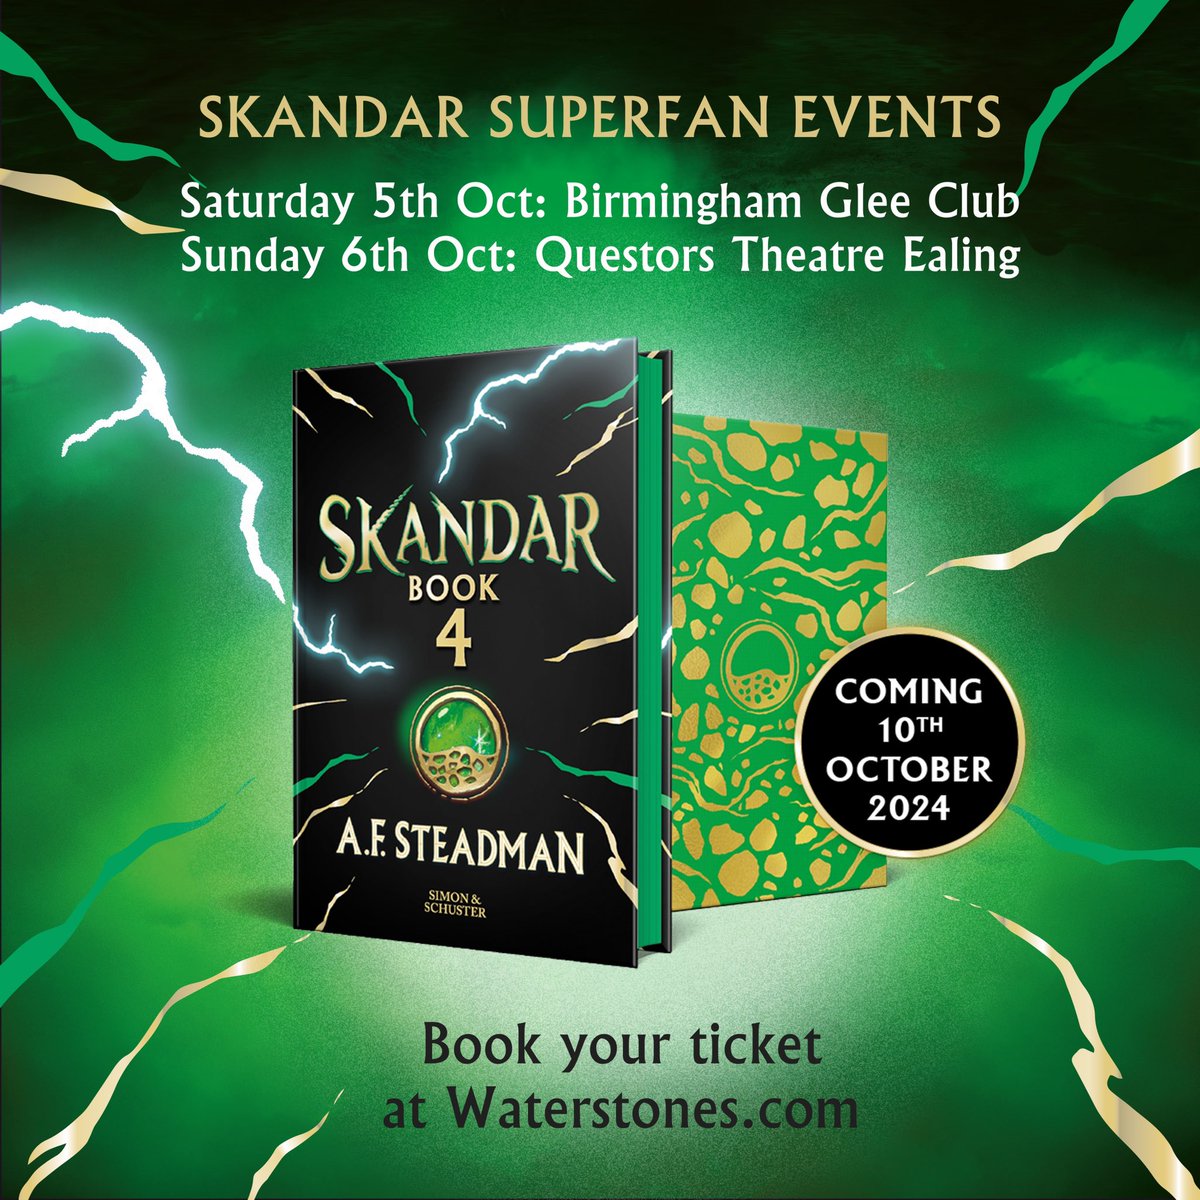 Announcing the stunning WATERSTONES EXCLUSIVE EDITION of Skandar 4 in all its earth-allied glory! What does it have? 🍃 Gorgeous sprayed green edges 🌳Extra content 💚Earth element gold foil design ✍️ Signed copies available while stocks last! Pre-order link 👇